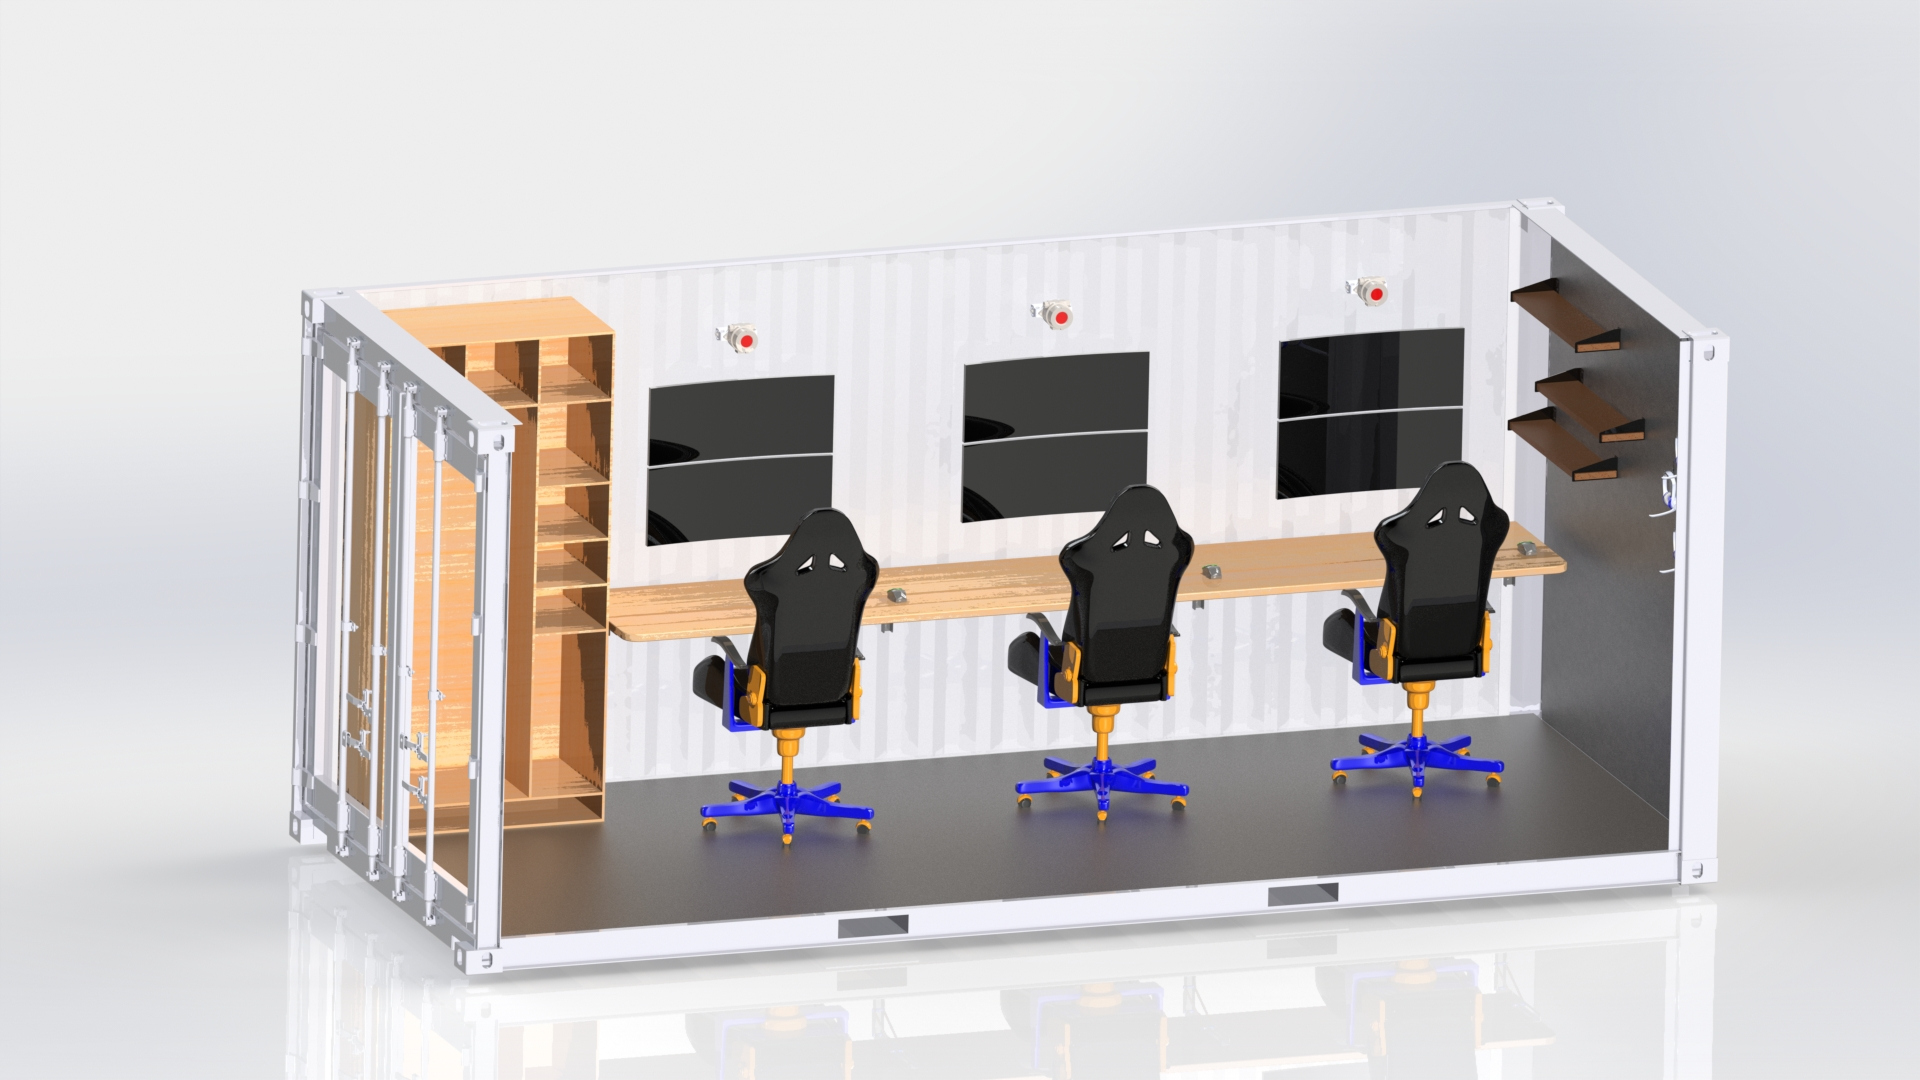 Rendering of the “Control Conex”, one of four containers in X-Bow Systems’ planned RFIB demonstration.